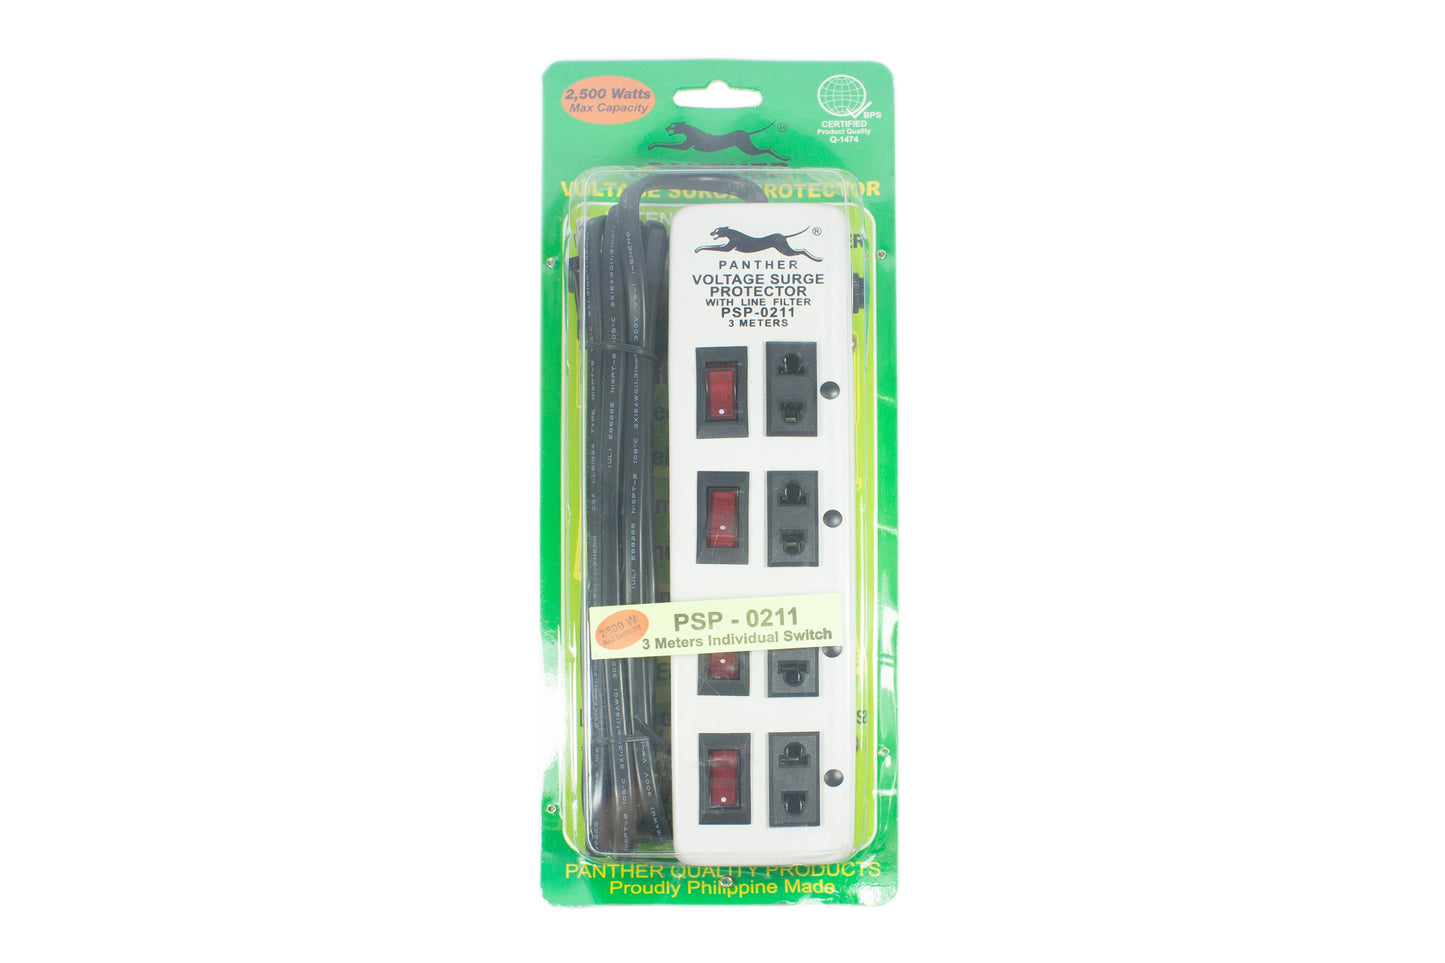 Panther 3M (PSP-0211) Voltage Surge Protector